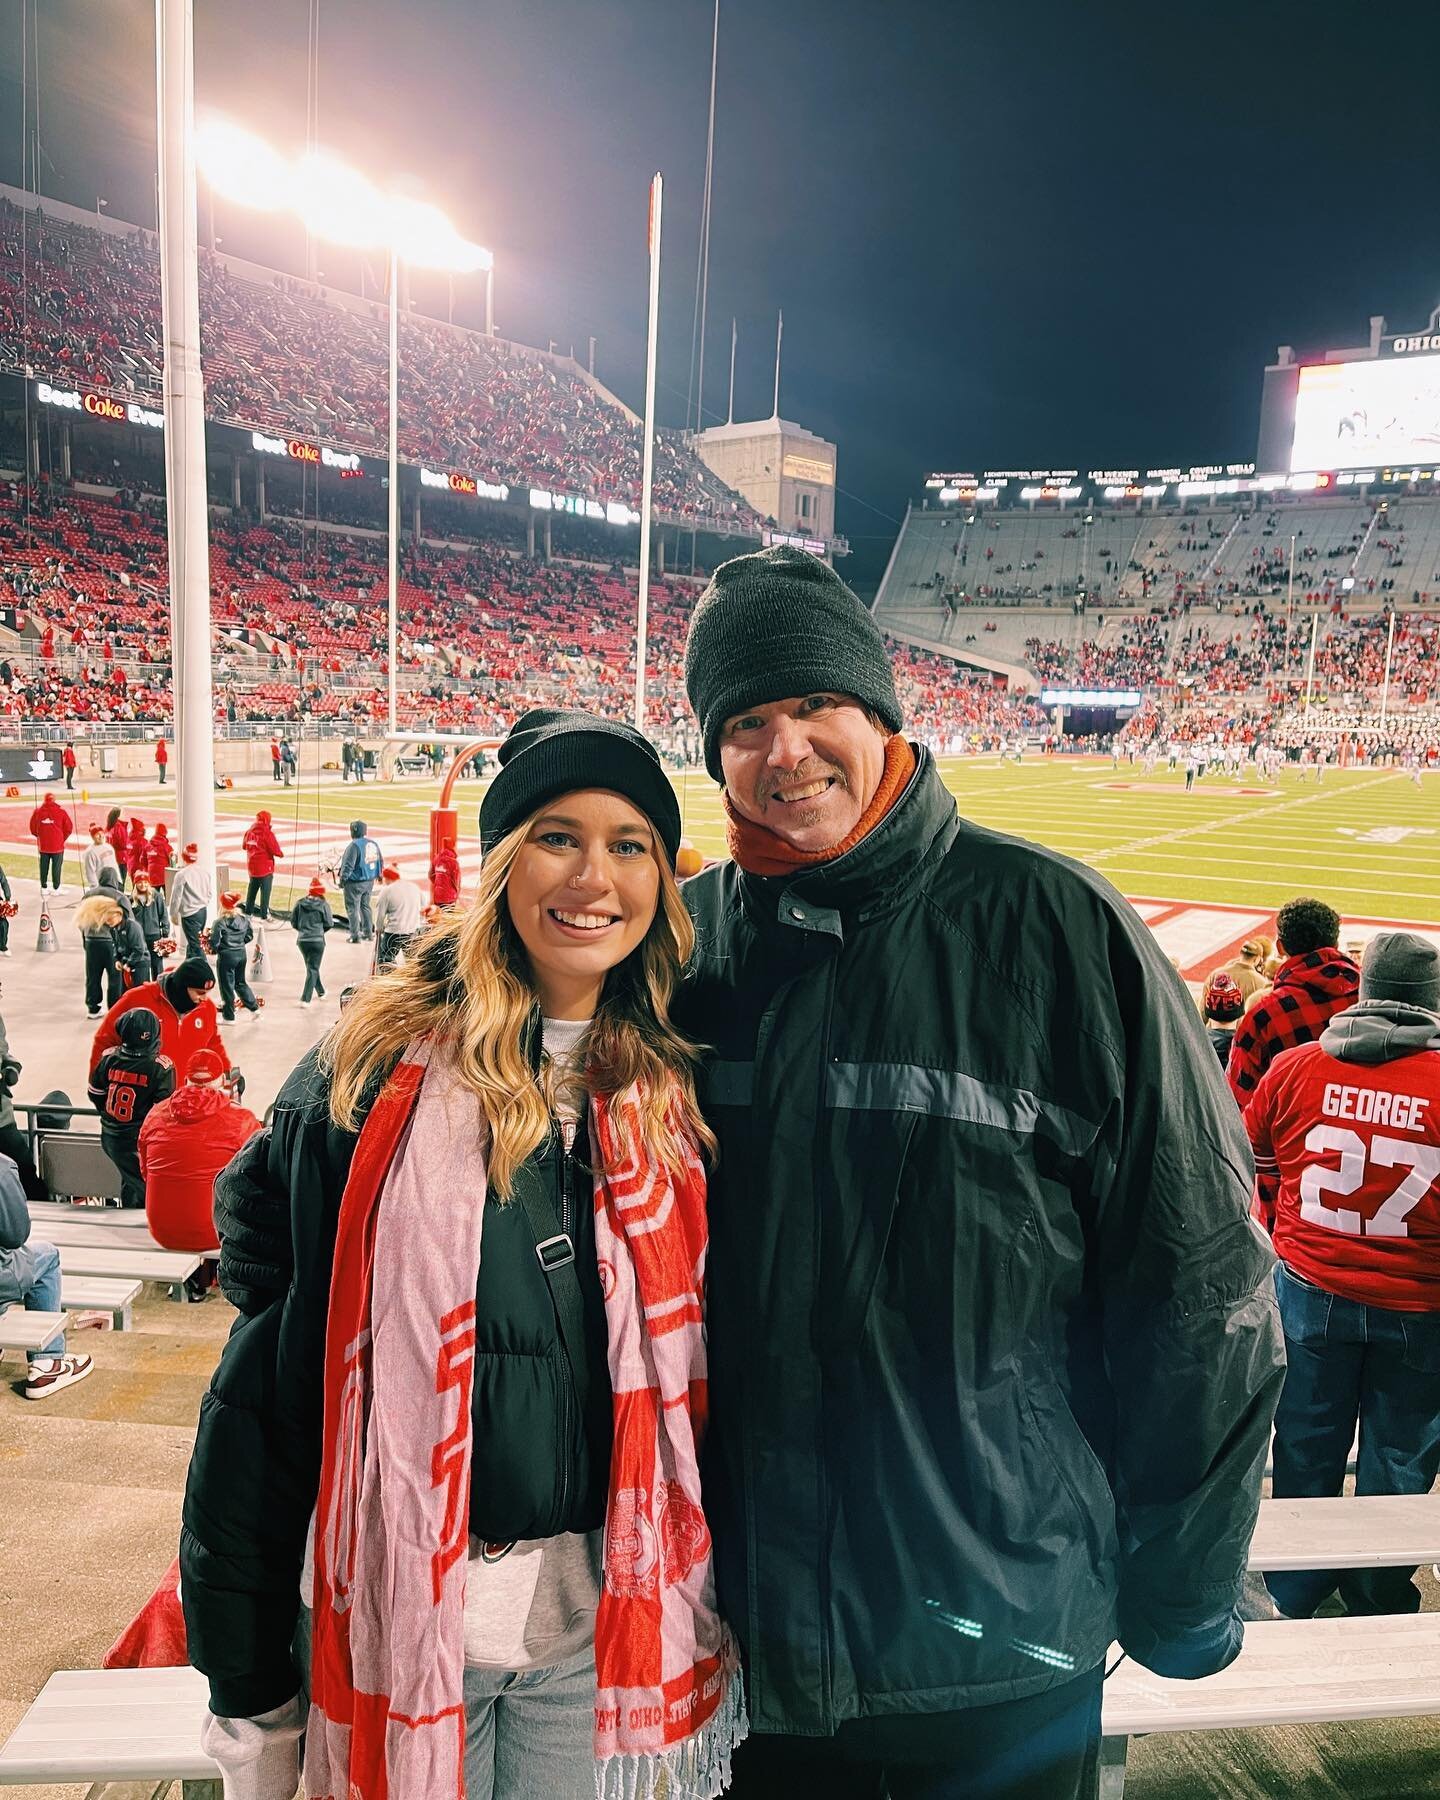 It took almost 28.5 years but I finally got to go to an OSU football game with my Dad!❤️ 

Thx NBC for the tickets and for wrapping up his sports season at a decent time this year so he could be home to take me! And shout out to his fellow tv crew bu